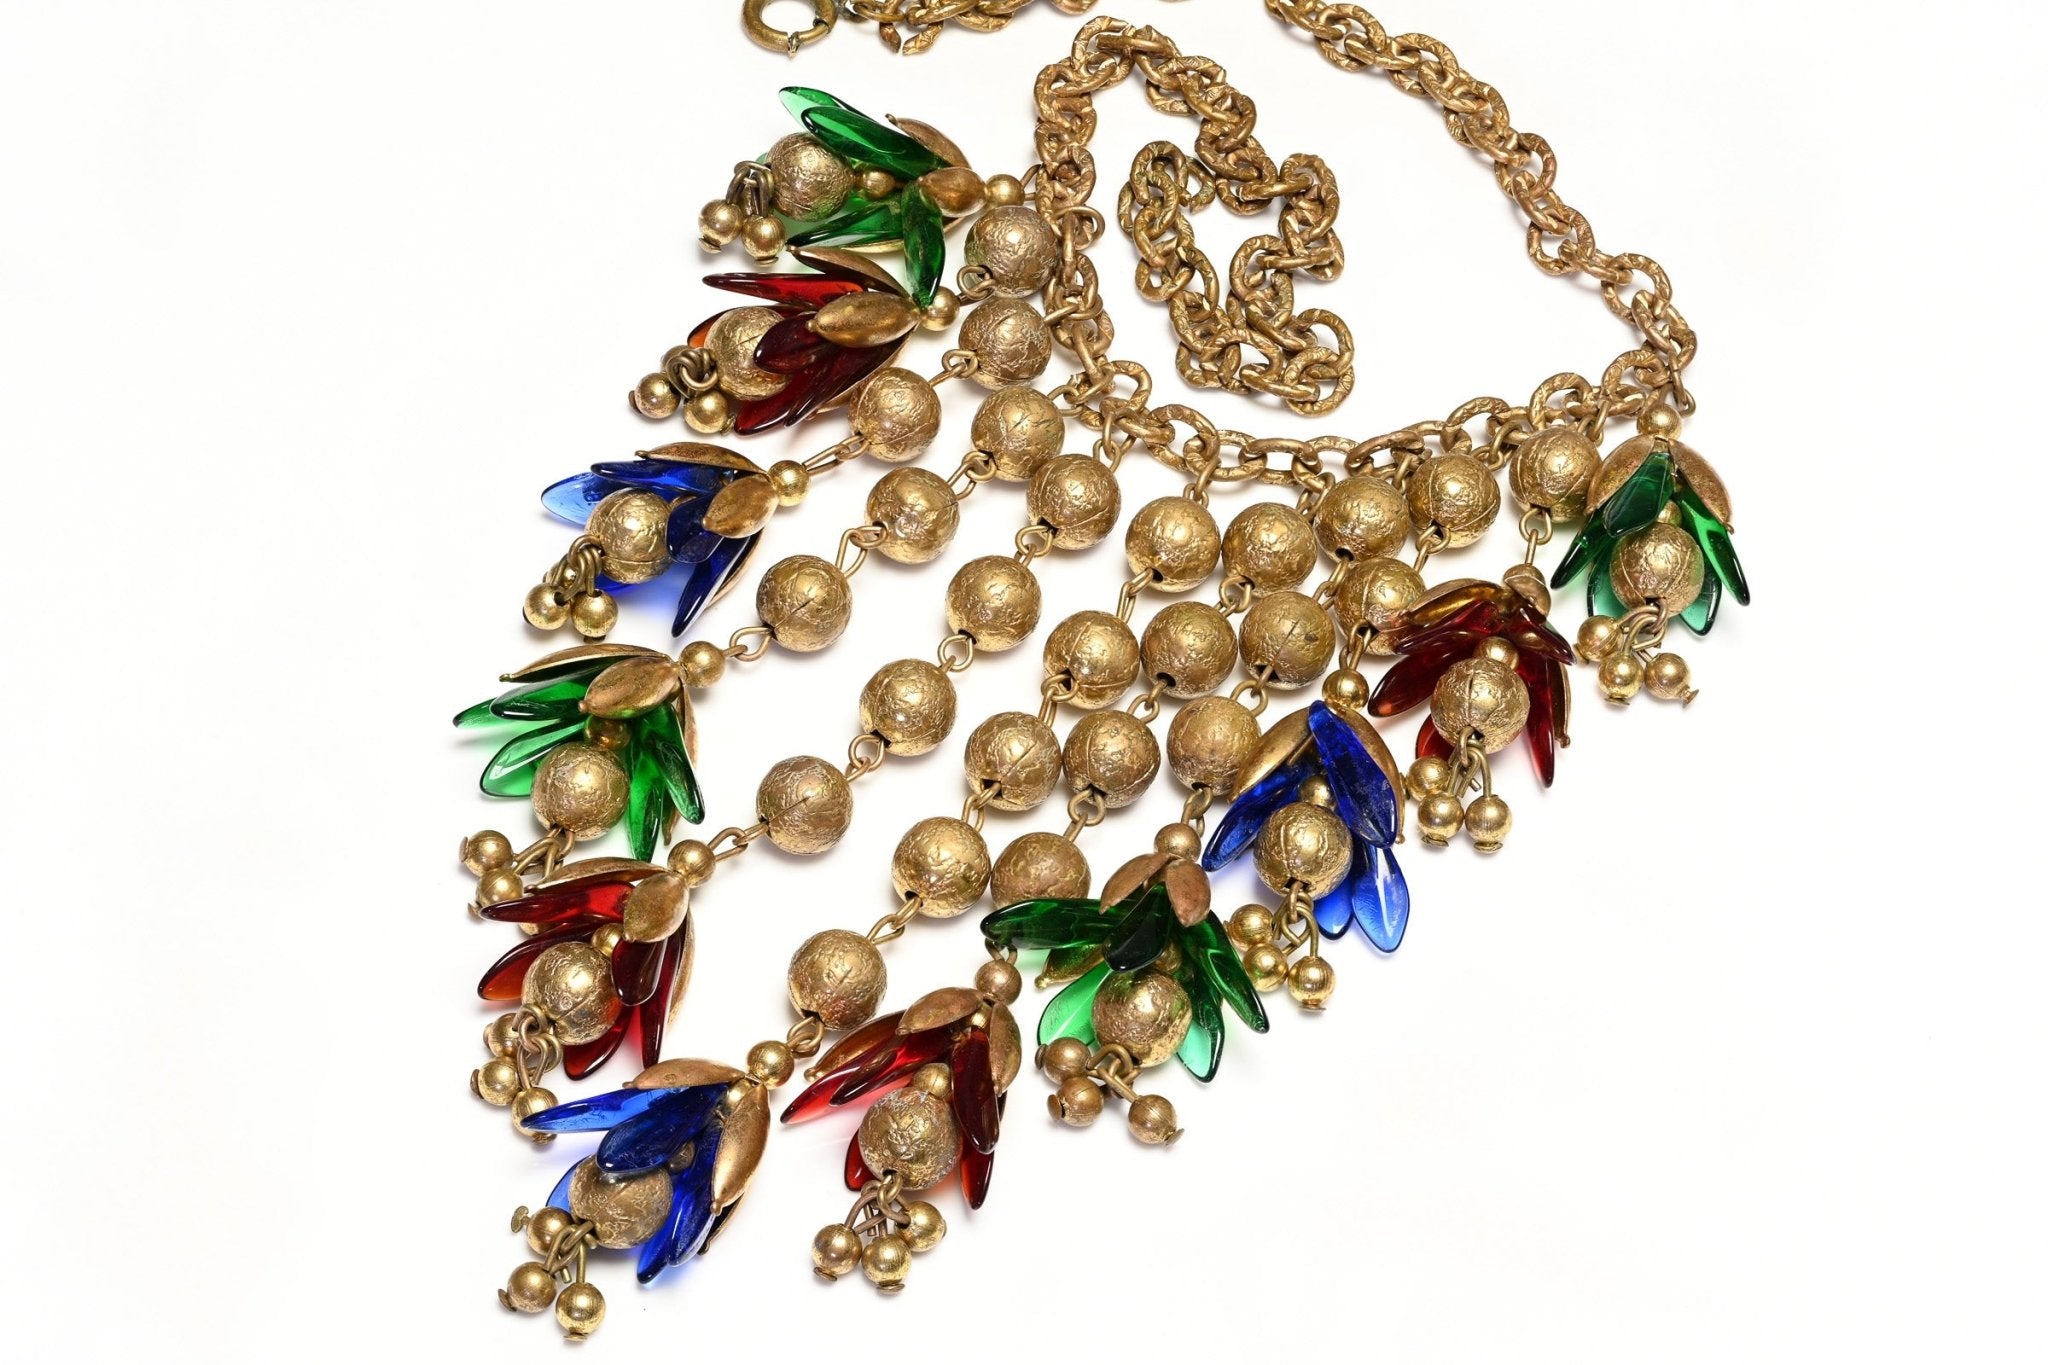 Vintage 1930's Miriam Haskell Green Red Blue Glass Flower Metal Beads Tassel Necklace